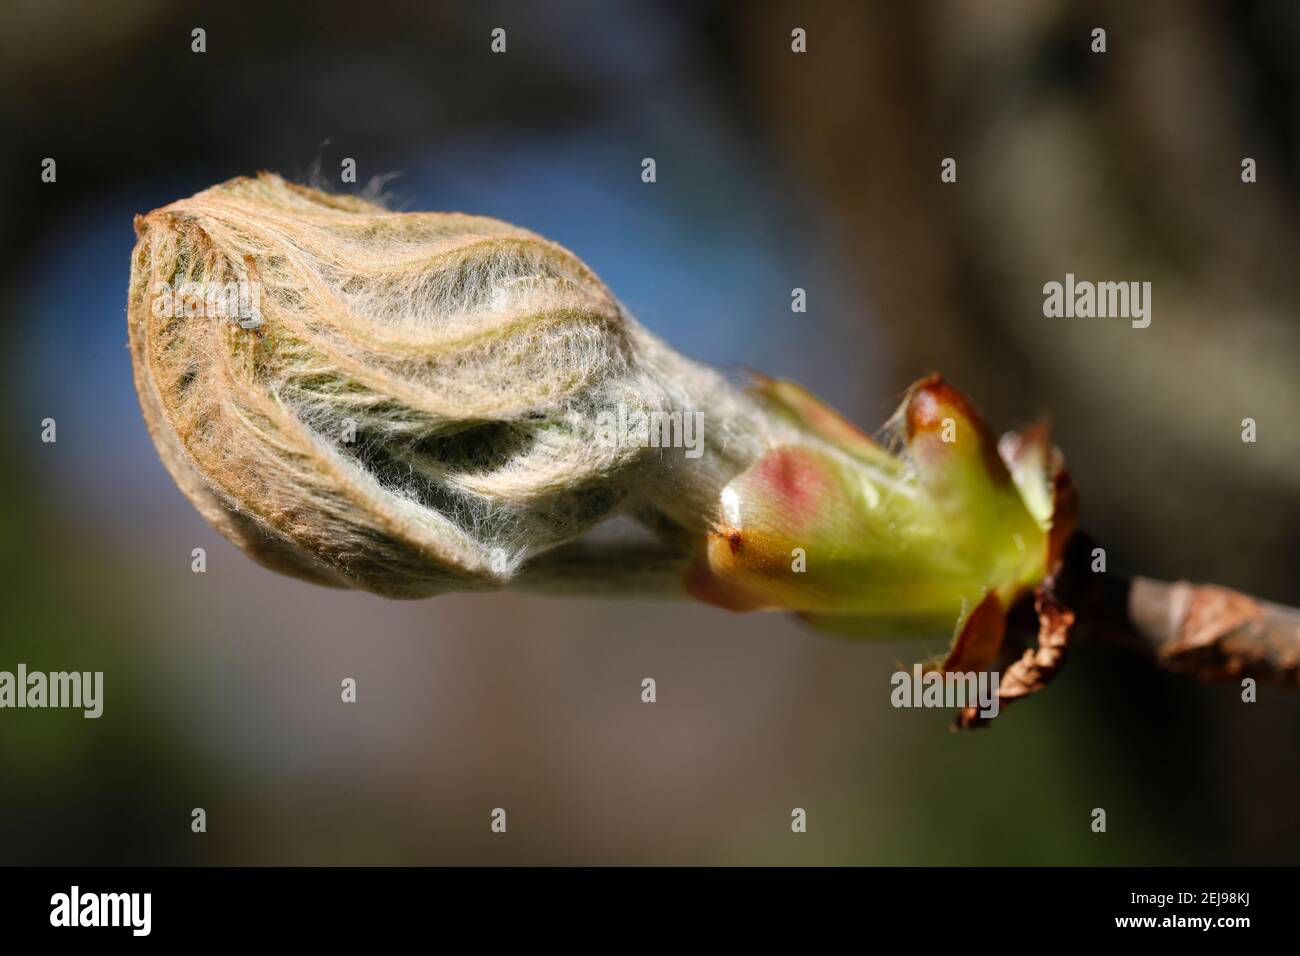 Bud of a chestnut leaf in spring Stock Photo